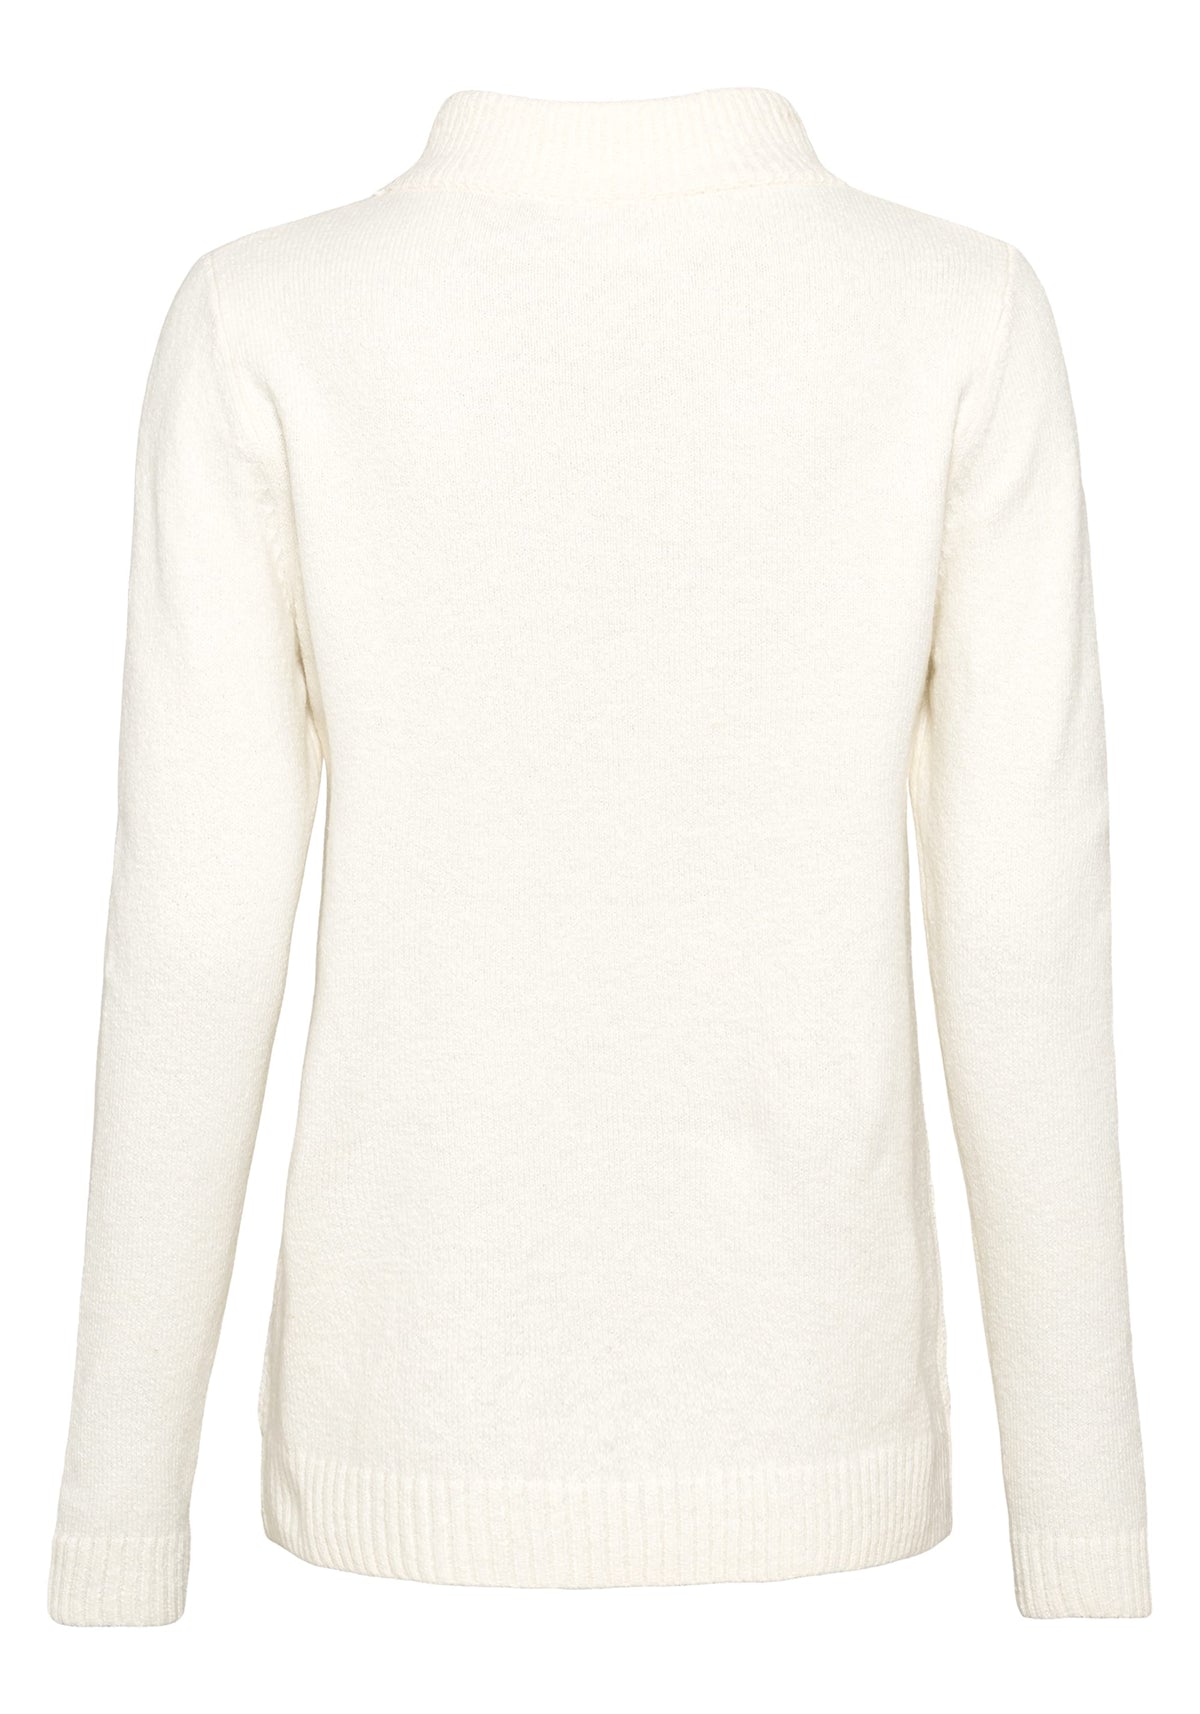 Cotton Blend Long Sleeve Cable Mock Neck Pullover